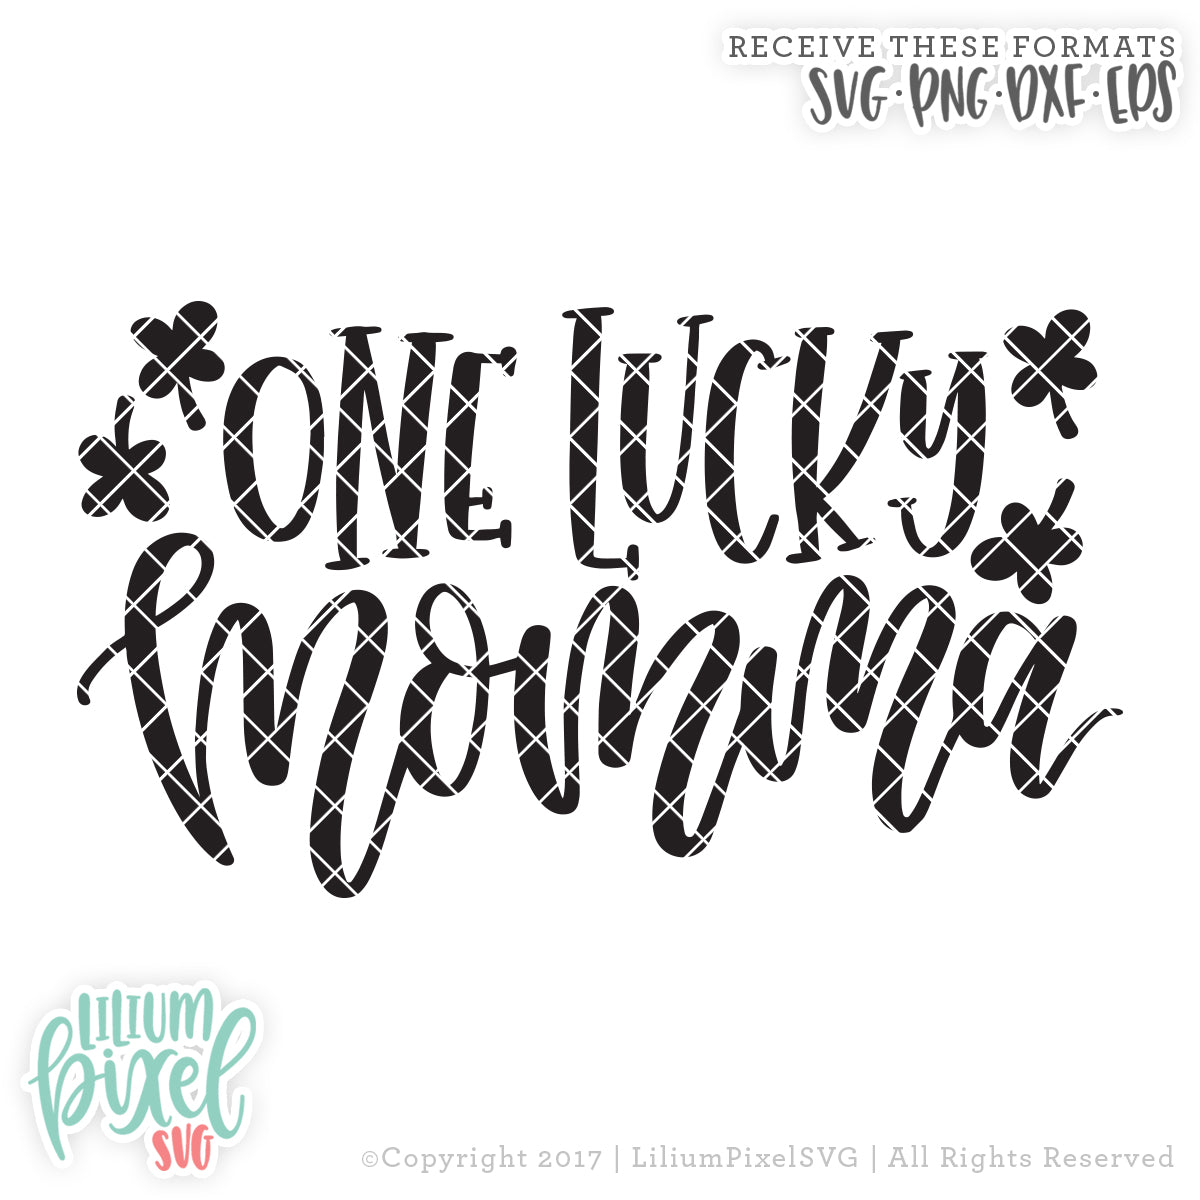 One Lucky Momma - SVG PNG DXF EPS Cut File • Silhouette • Cricut • More